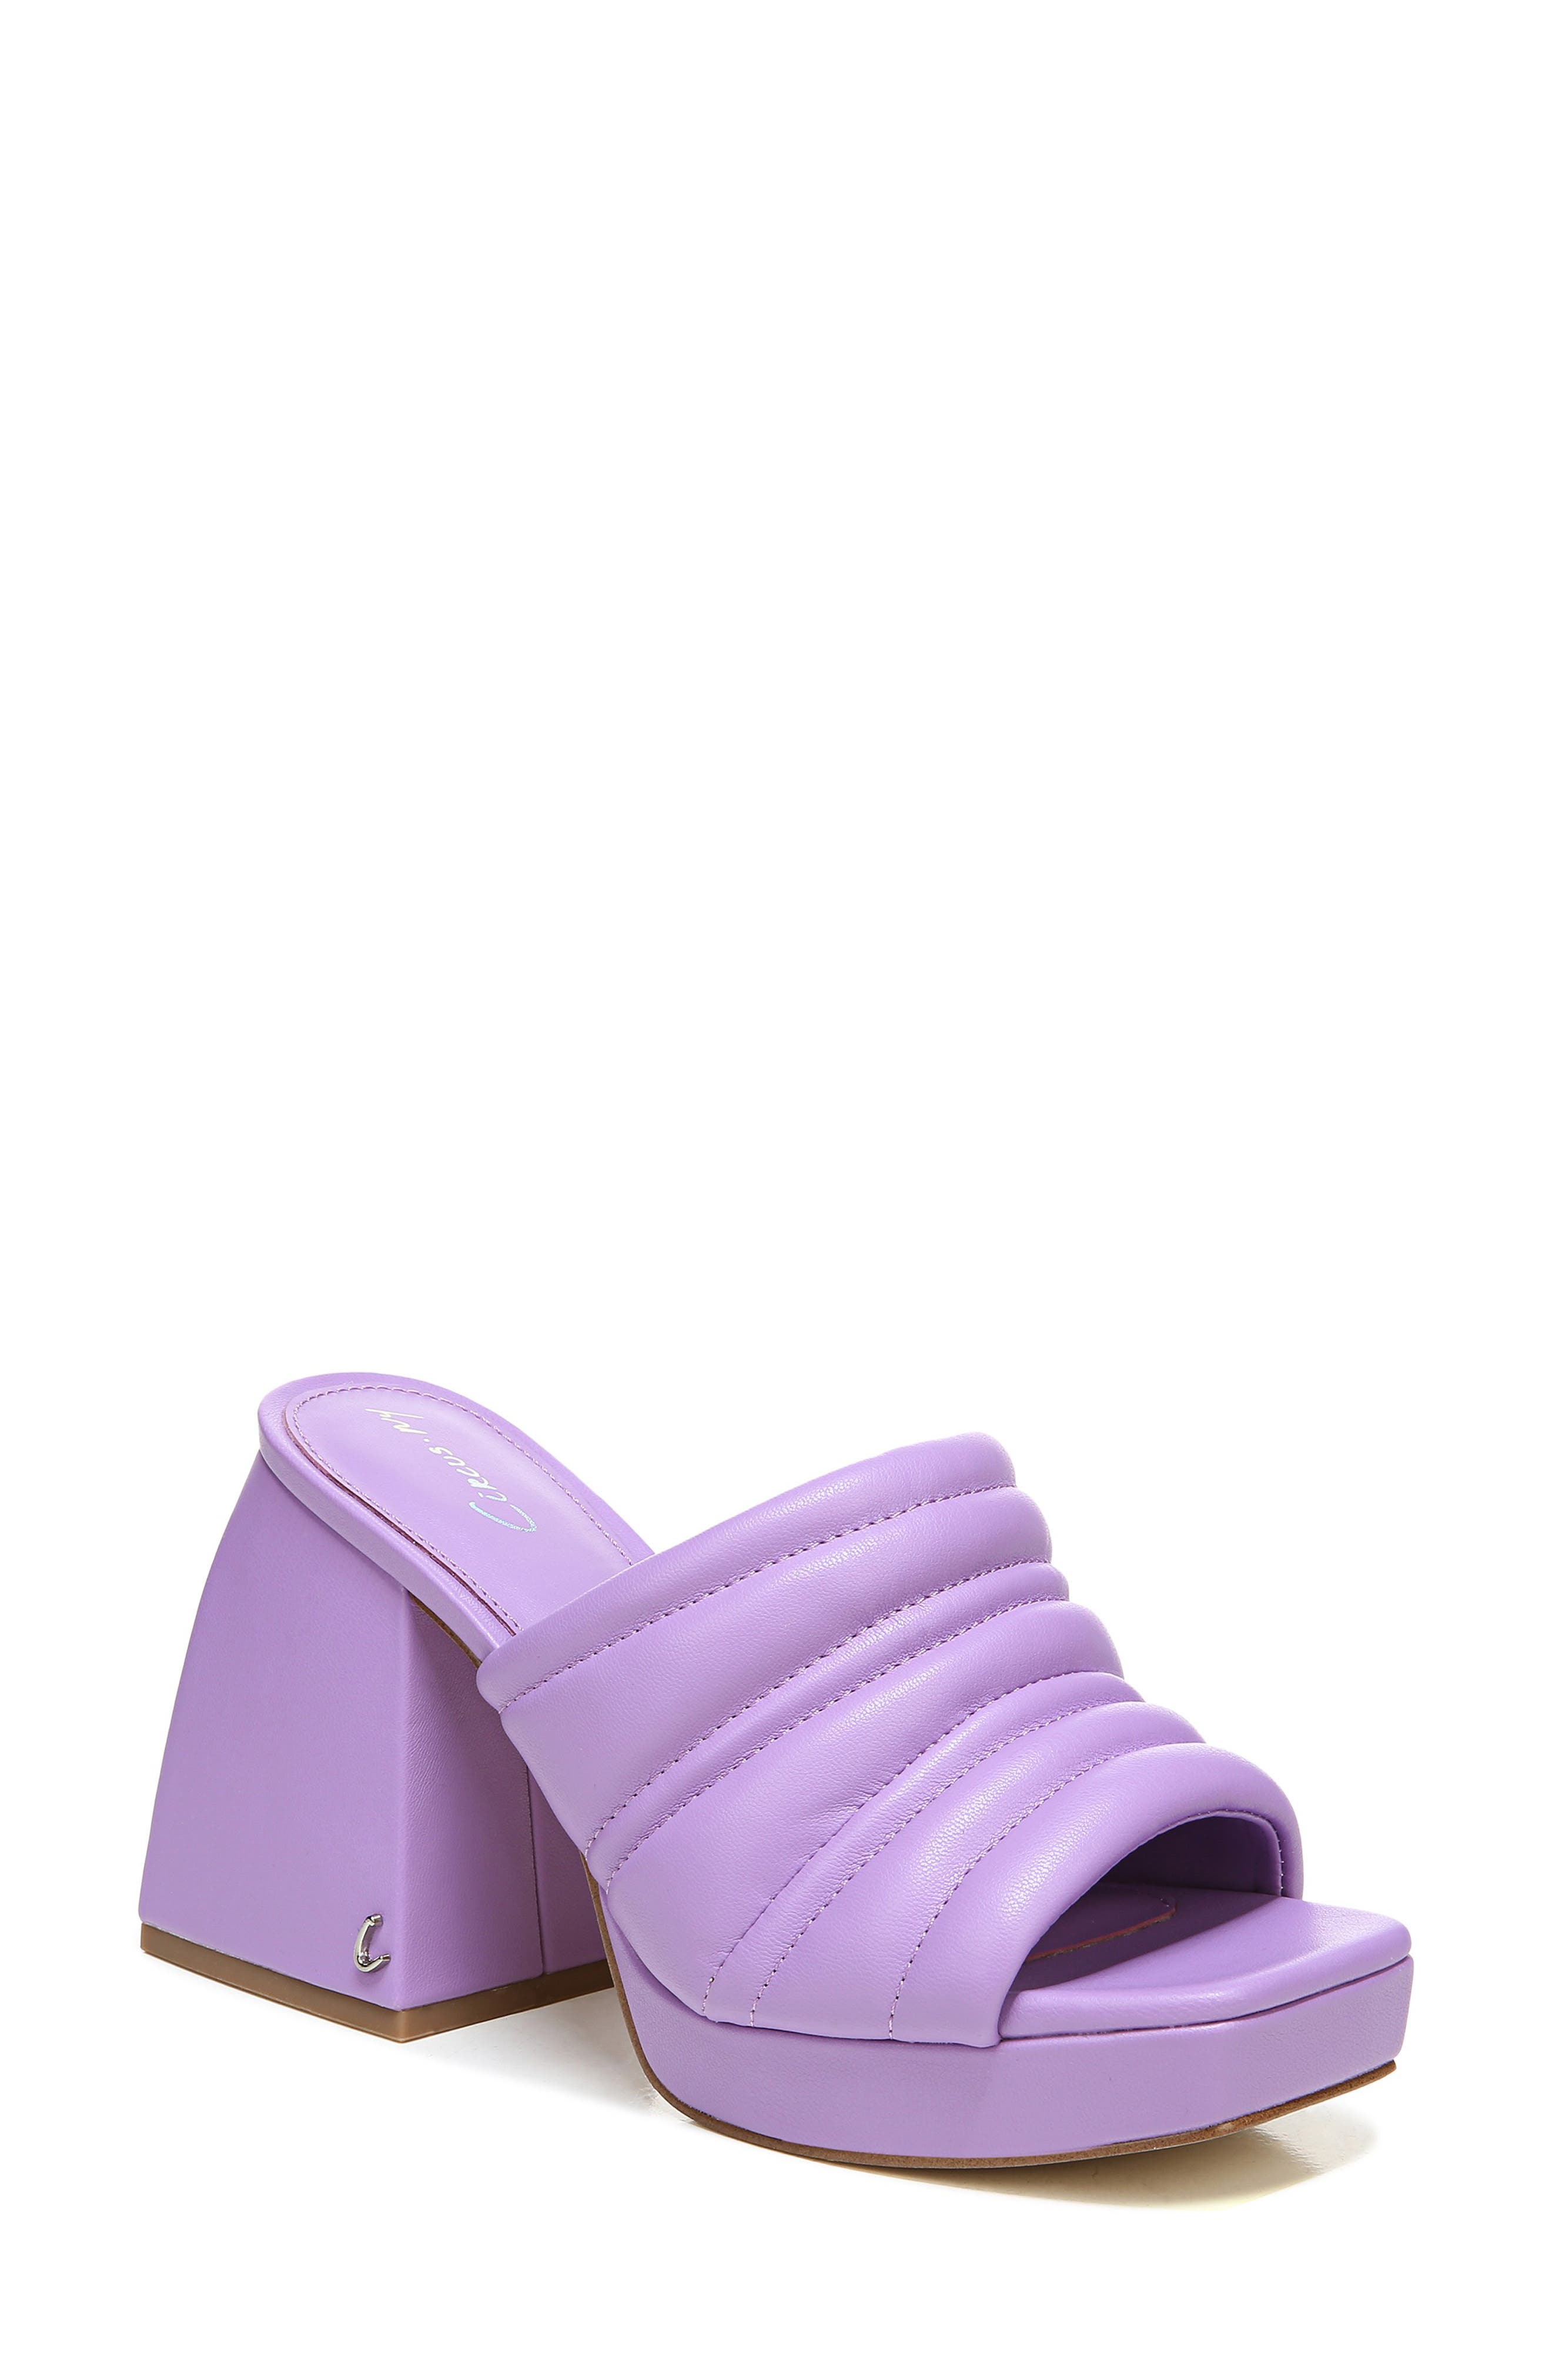 Circus by Sam Edelman Marlie Platform Sandal in Orchid Lilac at Nordstrom